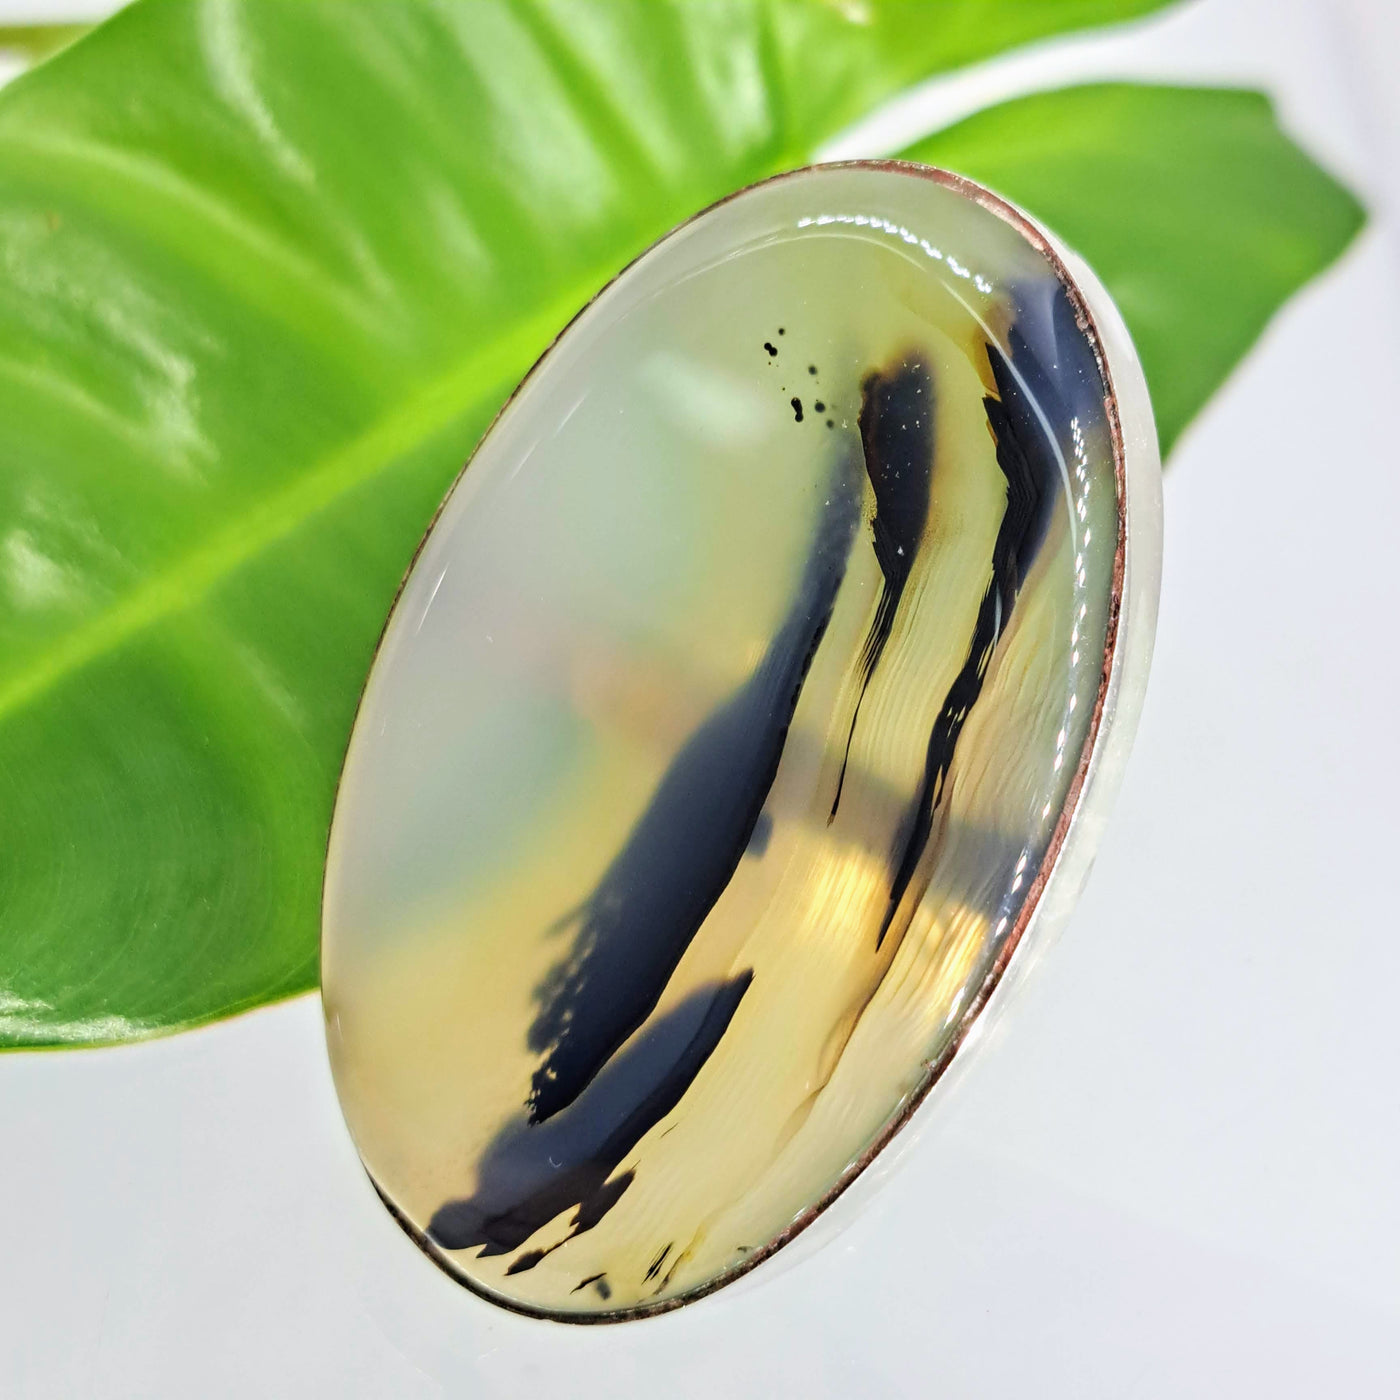 "The Bigger, The BETTER!" Adjustable Sz Ring - Agate, Sterling